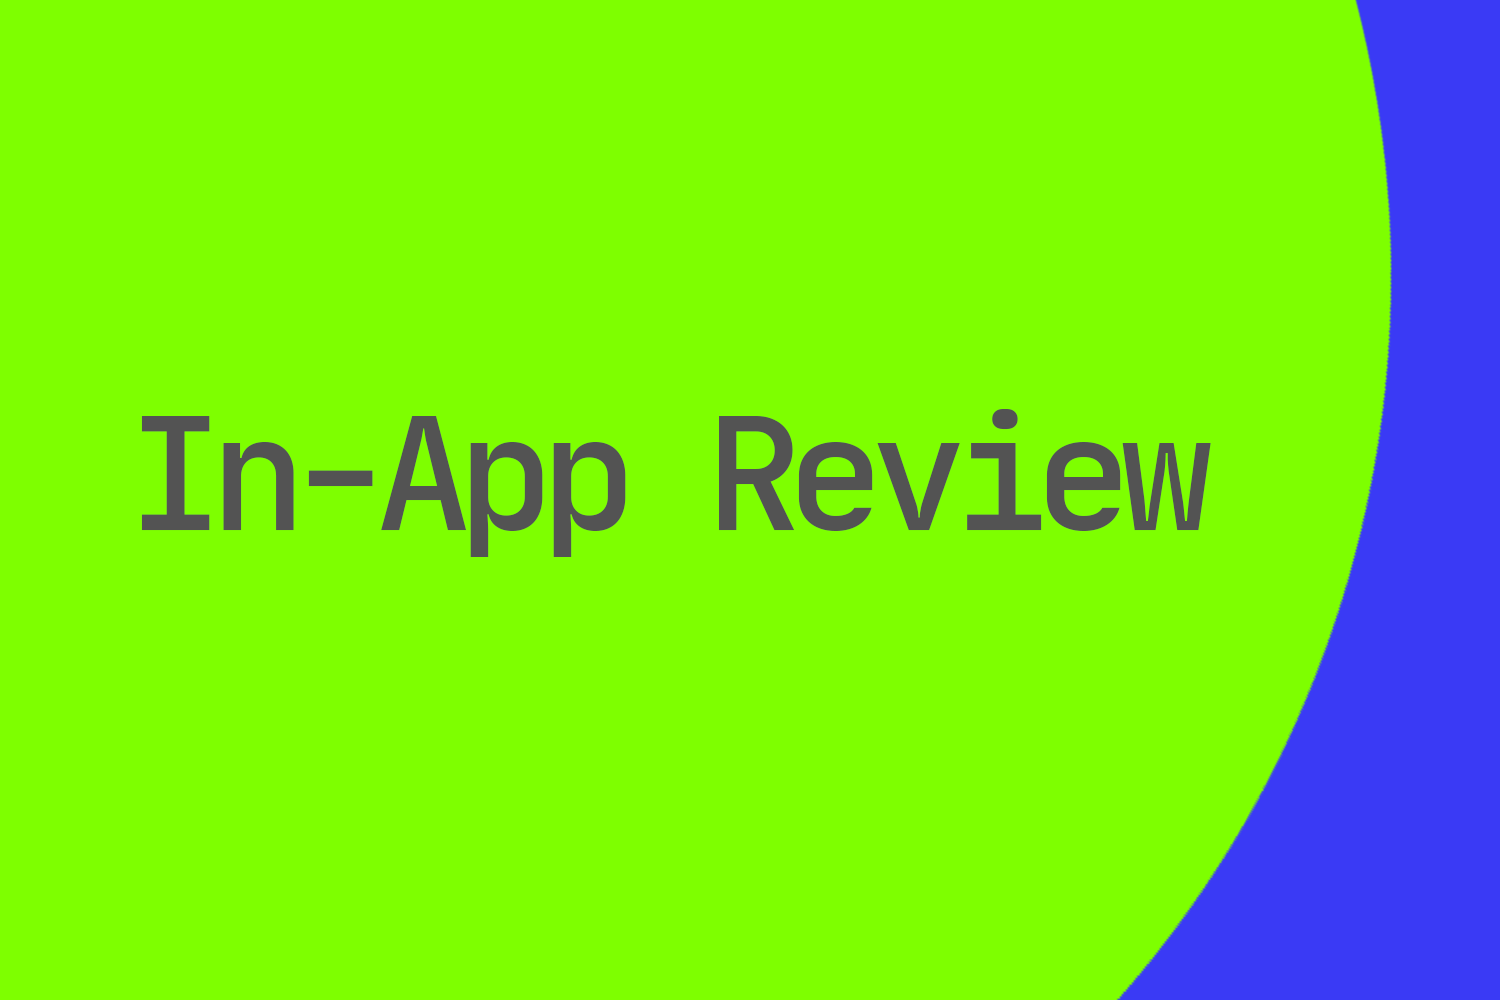 In-App Review in Android